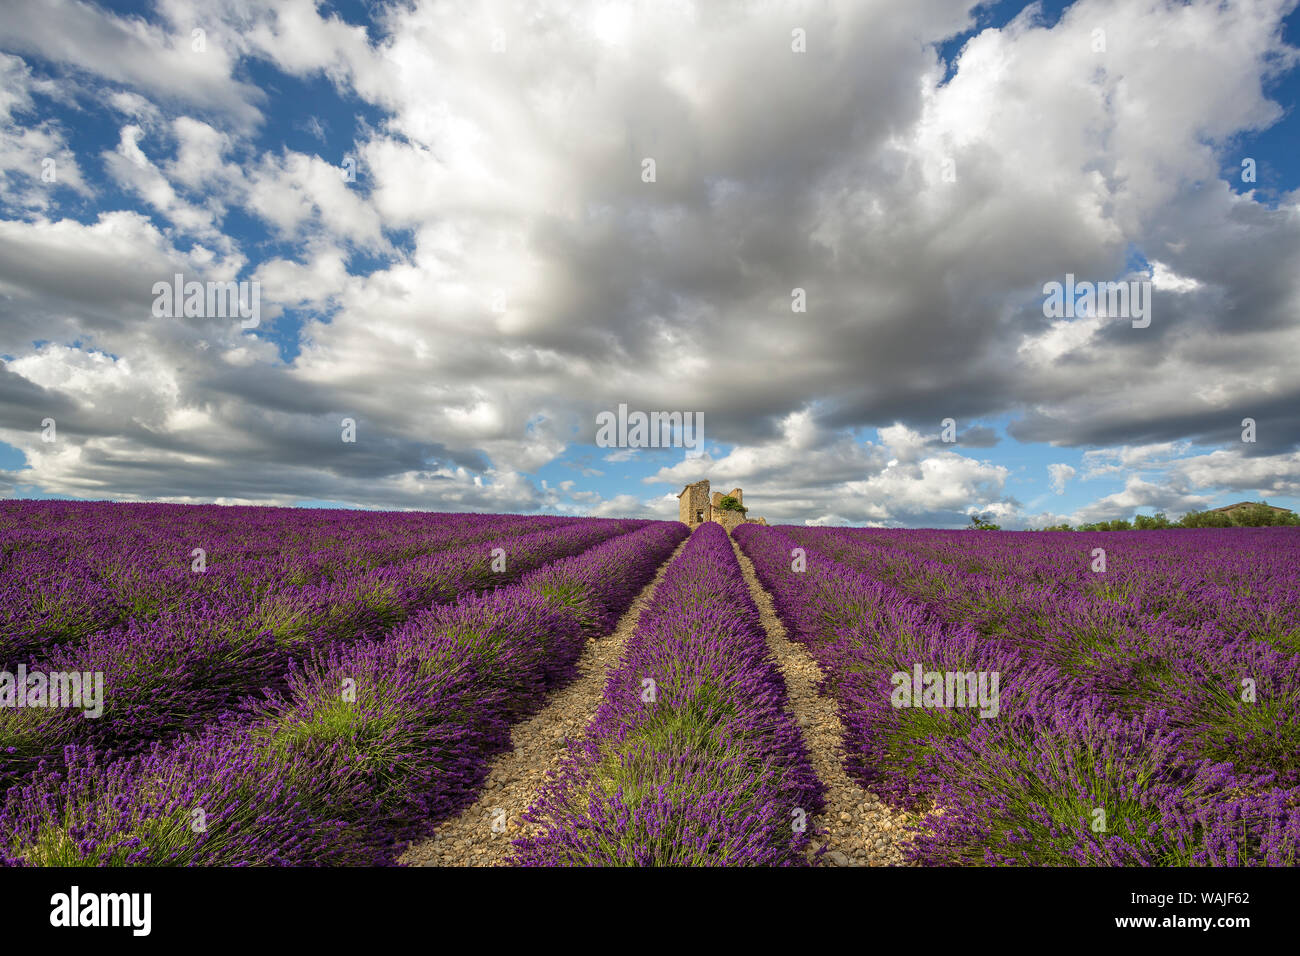 France, Provence, Valensole Plateau. Lavender rows and stone building ruin. Credit as: Jim Nilsen / Jaynes Gallery / DanitaDelimont.com Stock Photo